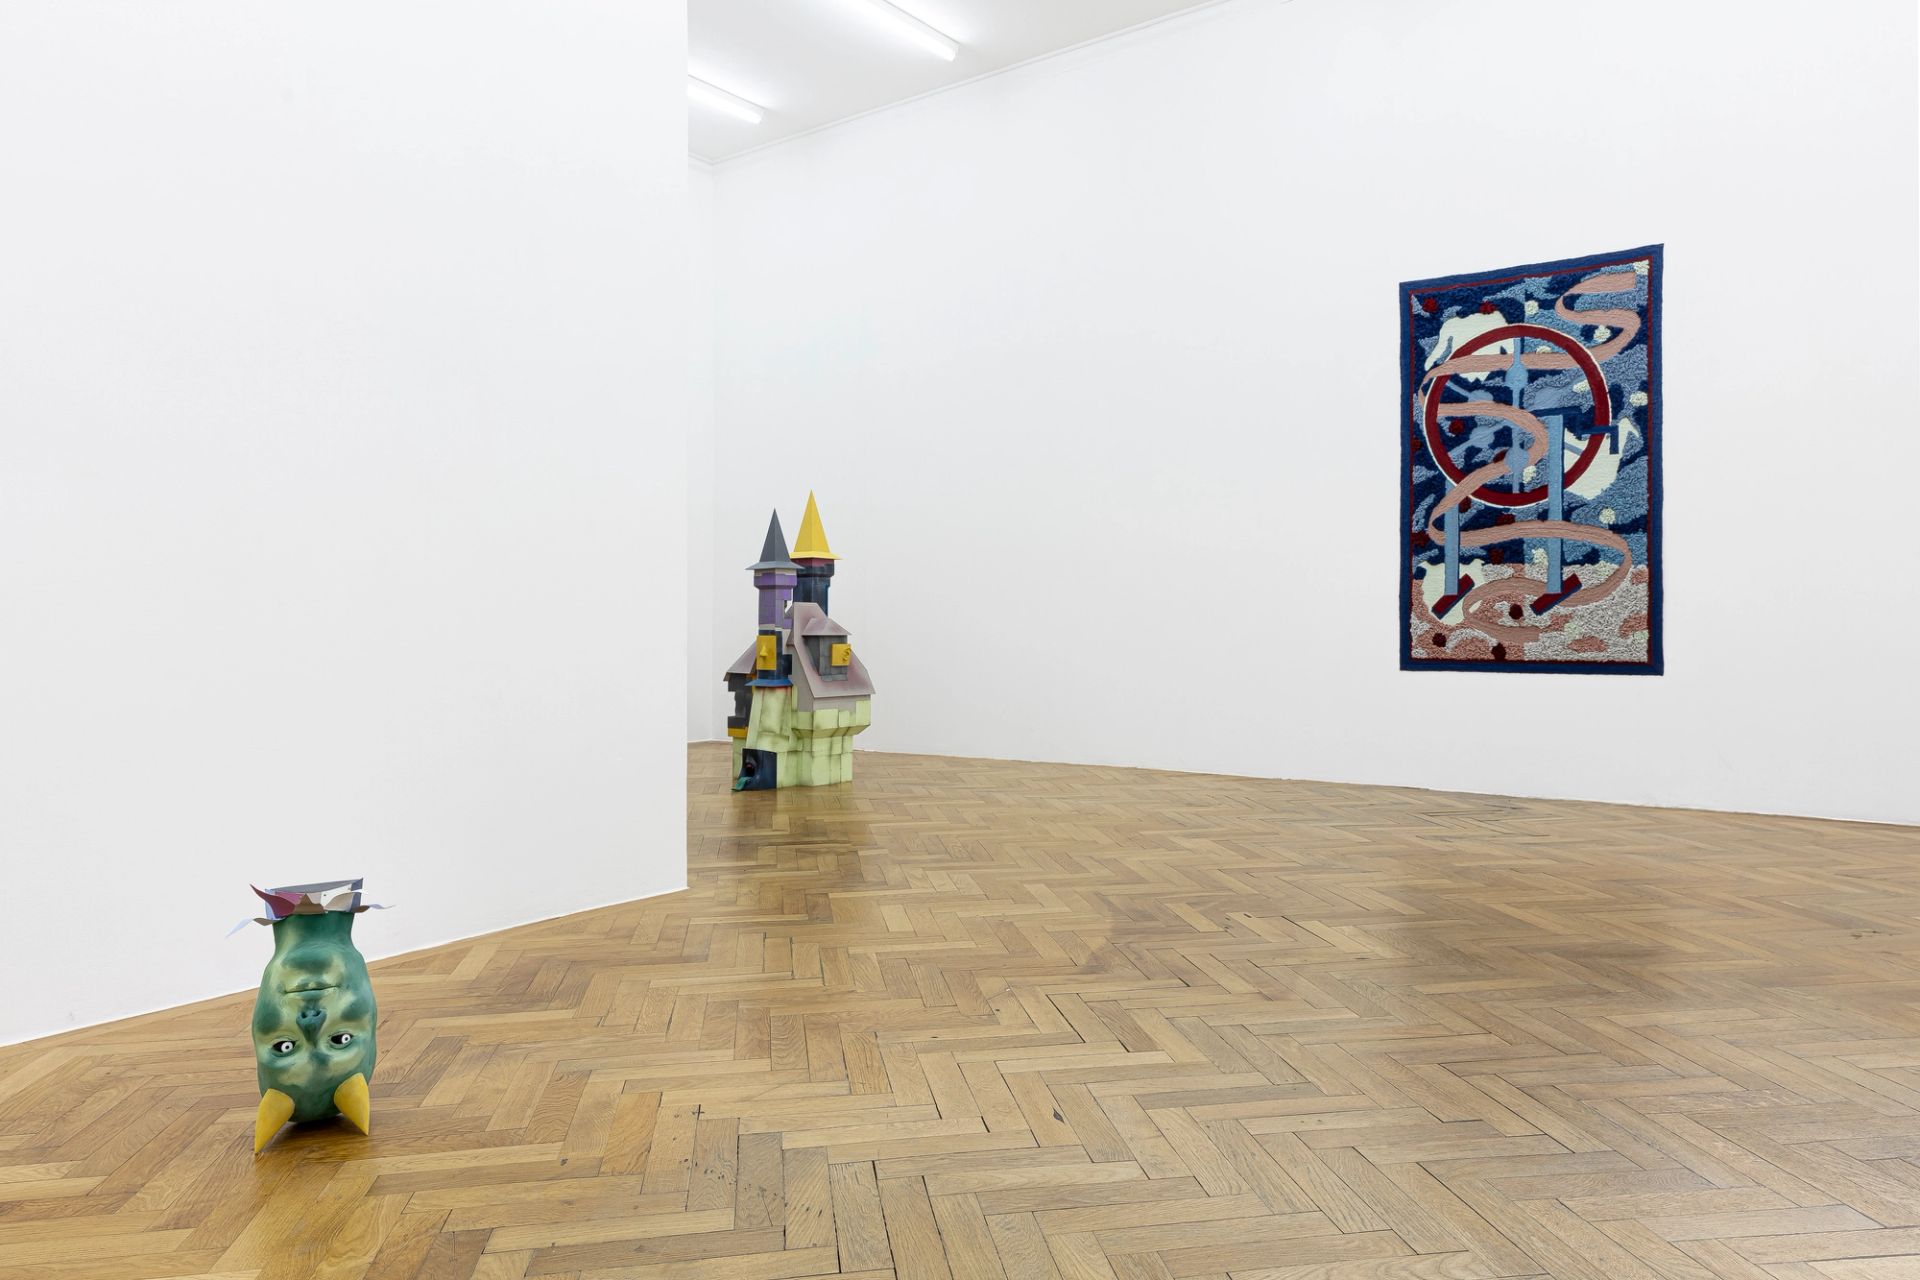 Throw of the dice, Lukas Hoffmann & Sophia Mainka, 2024, in collaboration with GiG Munich, exhibition view at Sperling 